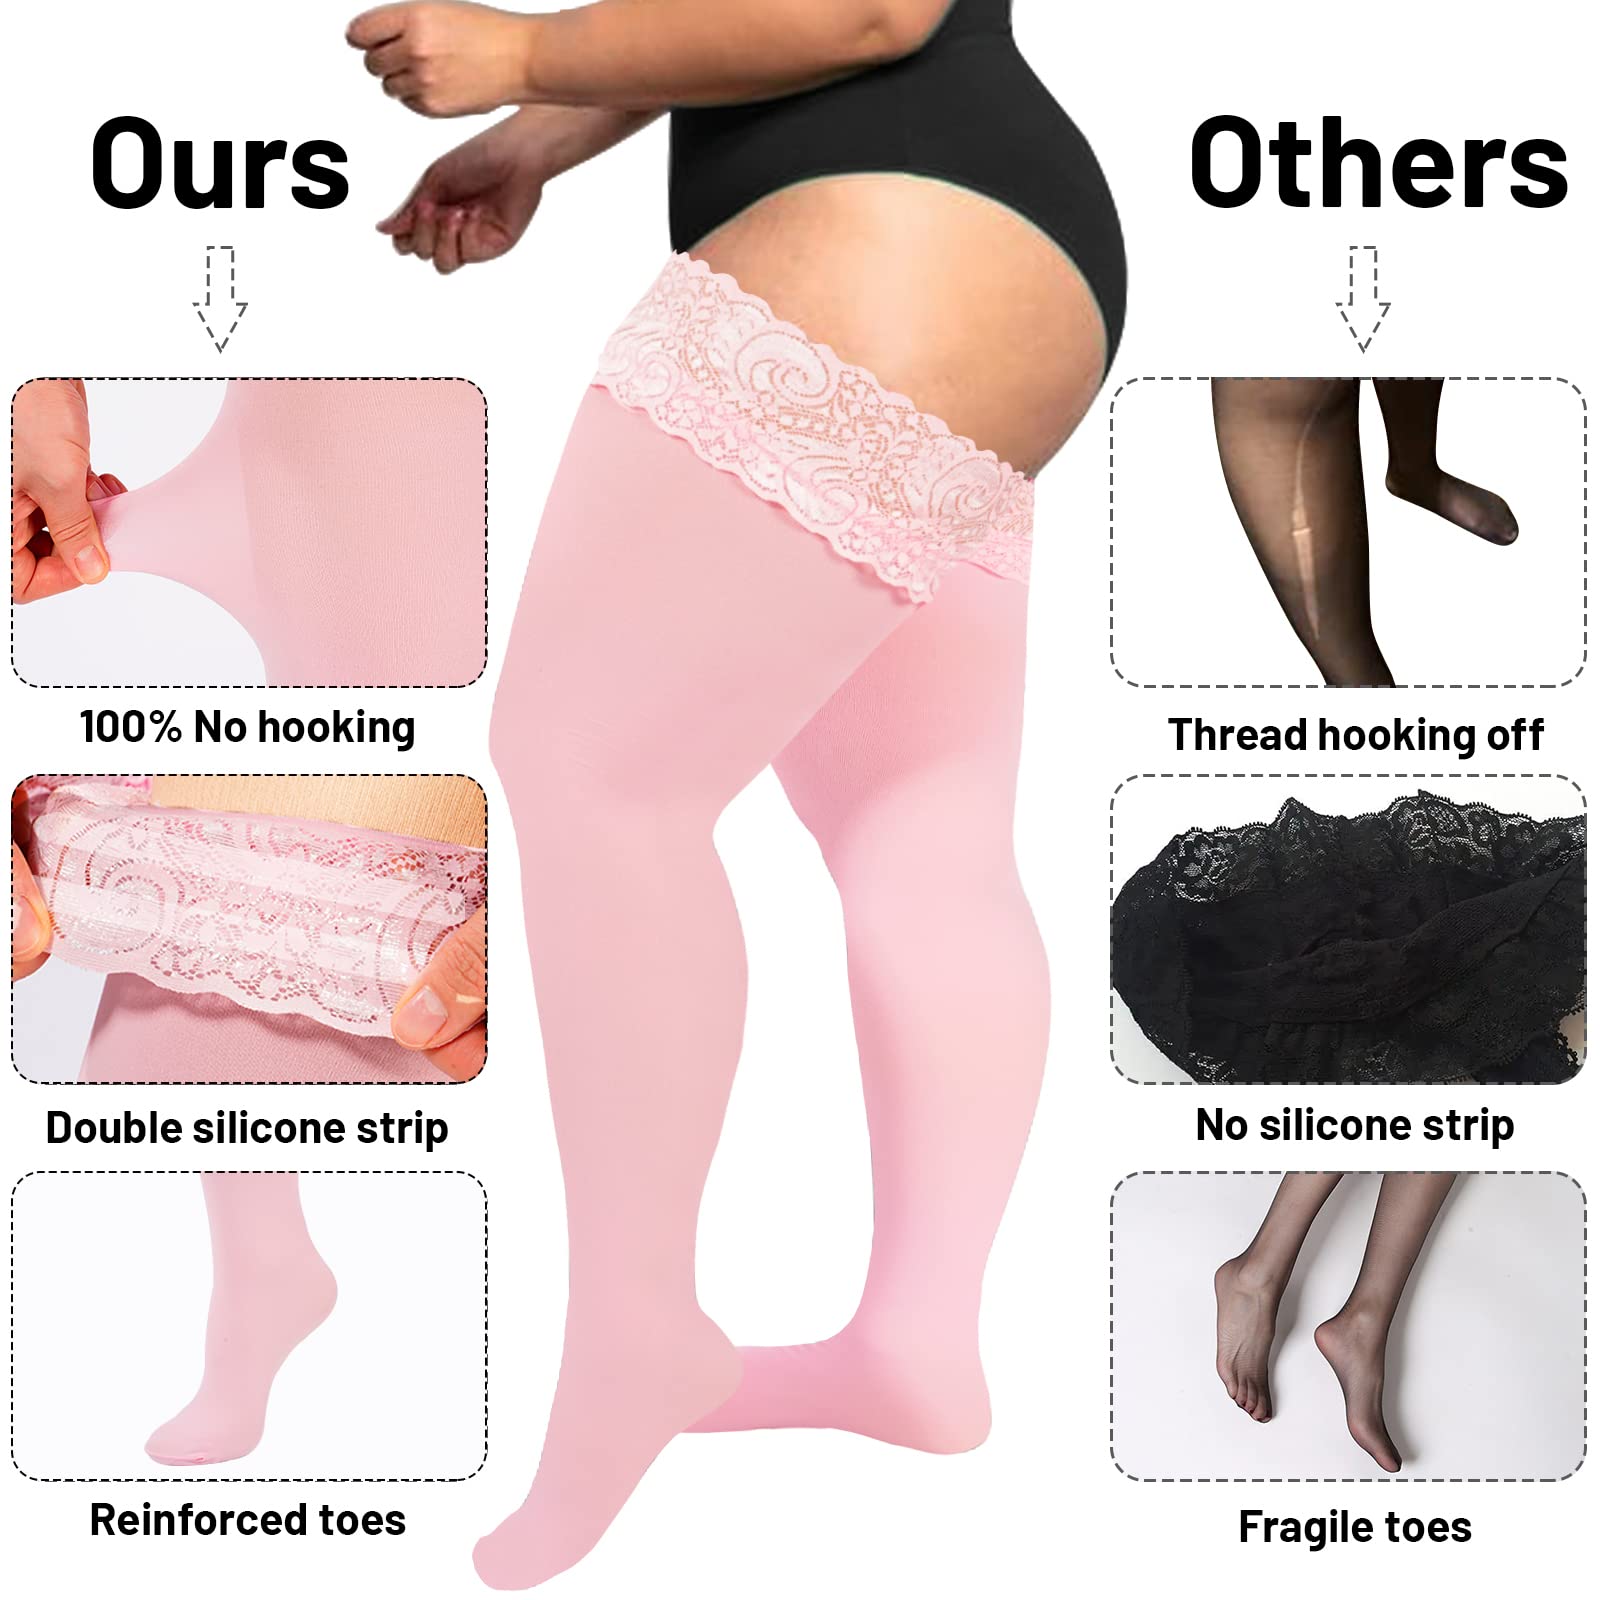 55D Semi Sheer Silicone Lace Stay Up Thigh Highs Pantyhose-Light Pink - Moon Wood